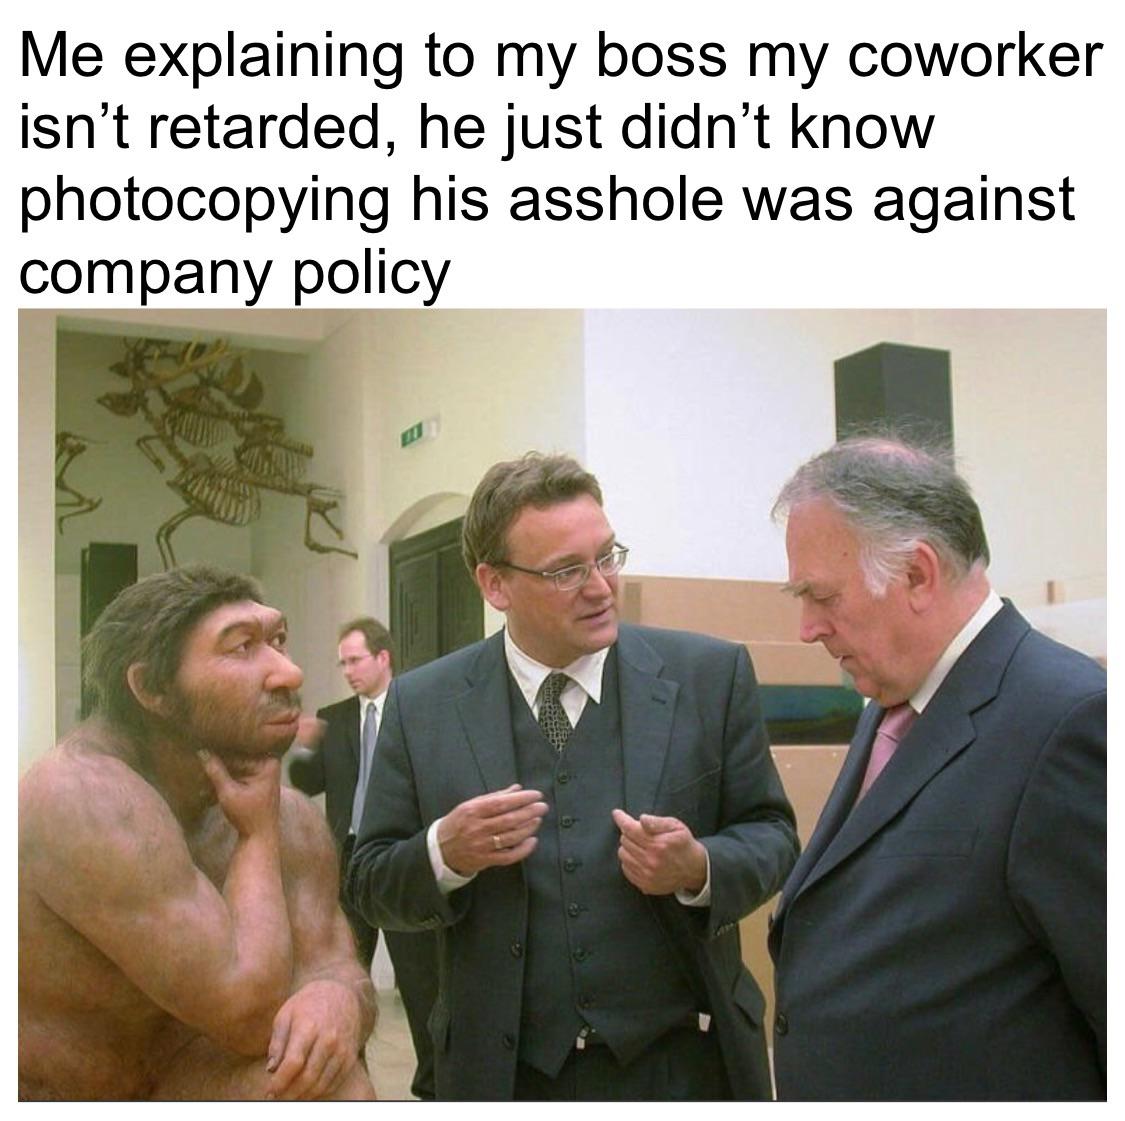 dank memes - man talking to neanderthal - 3 Me explaining to my boss my coworker isn't retarded, he just didn't know photocopying his asshole was against company policy